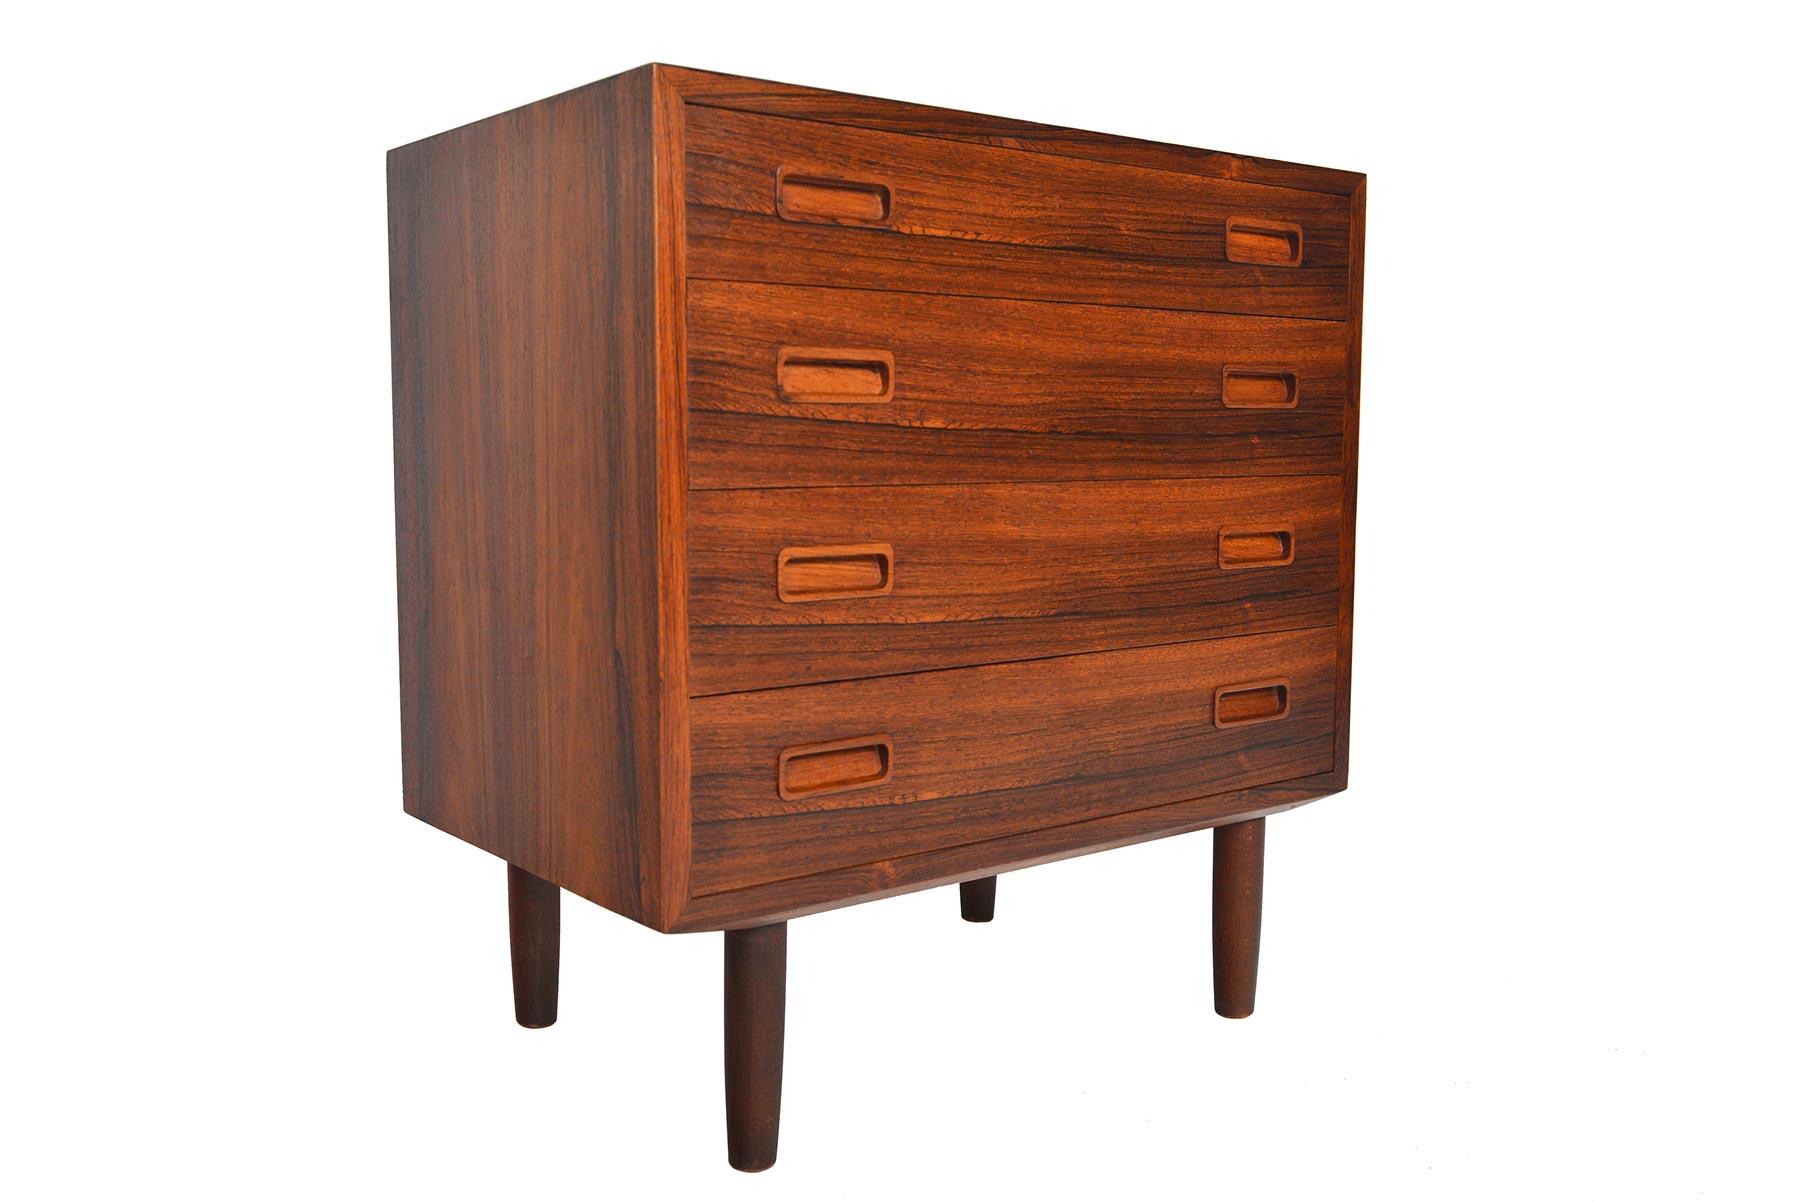 Danish modern midcentury gentleman's chest was manufactured by Hundevad + Co. in the 1960s. Crafted in Brazilian rosewood, this wonderfully sized piece features hand carved rosewood drawer pulls. In excellent original condition.